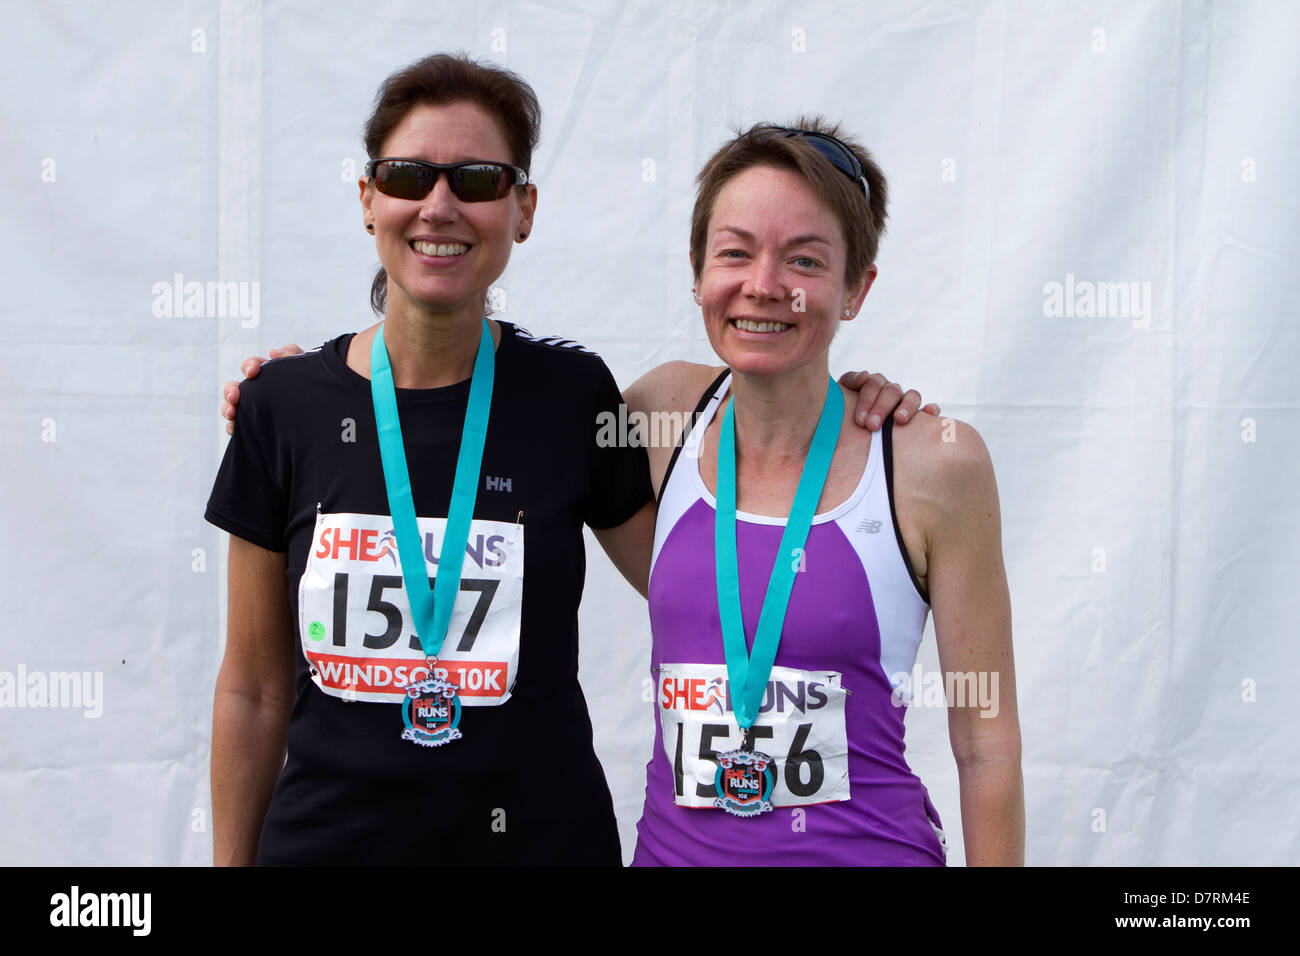 Finishers of the She Runs Windsor event with their medals. Stock Photo